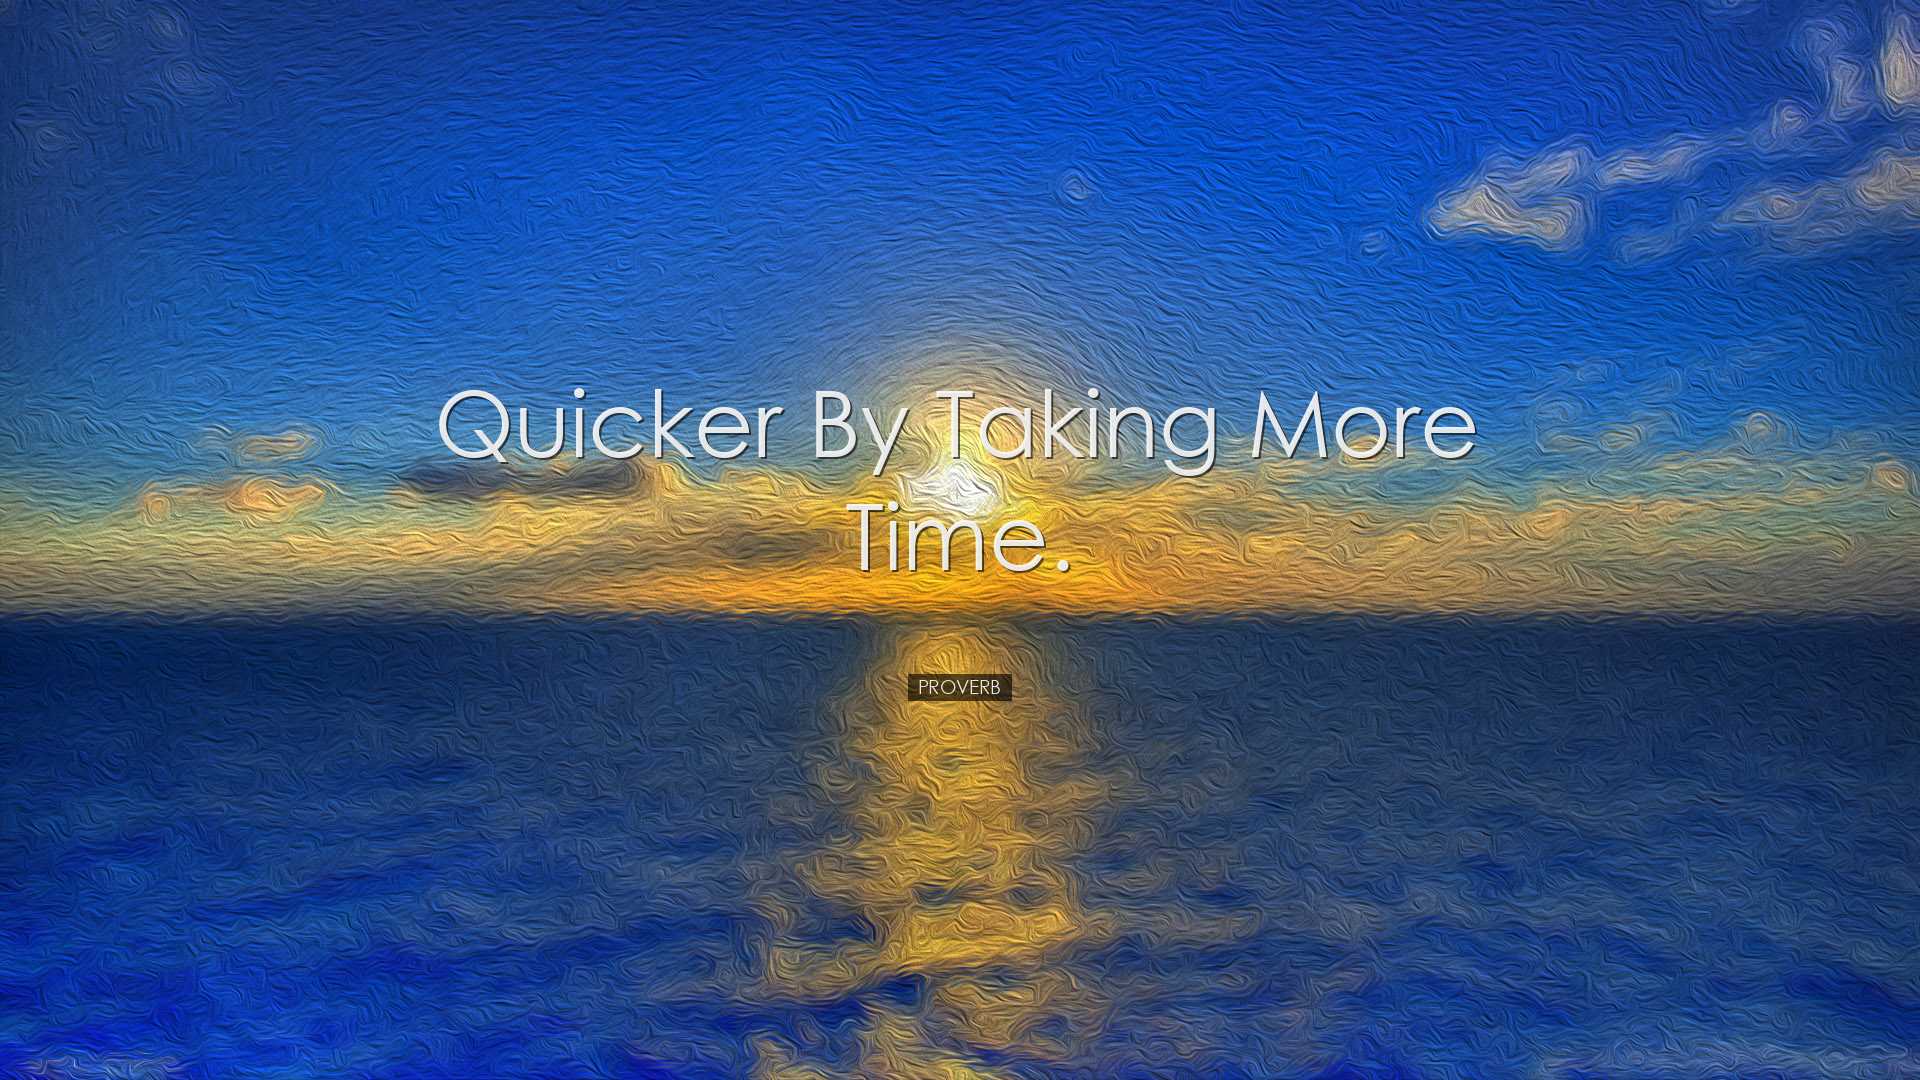 Quicker by taking more time. - Proverb